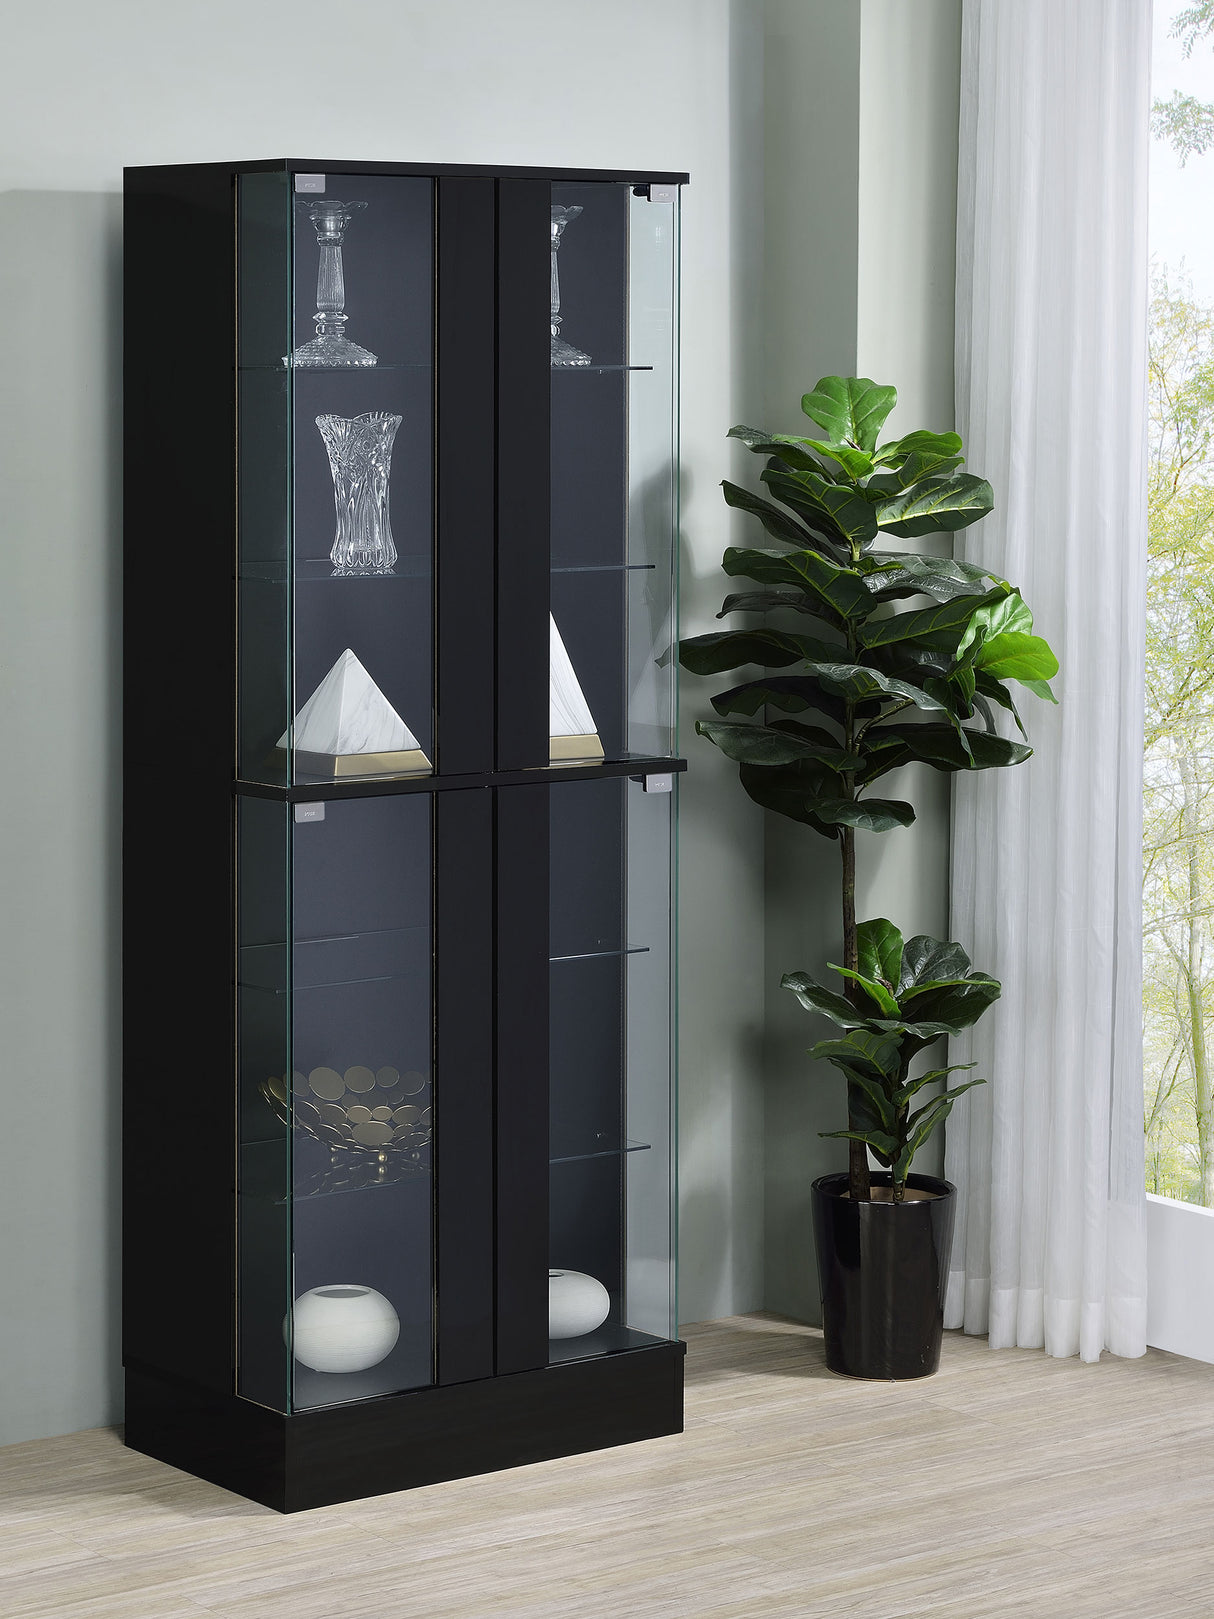 Curio Cabinet - Cabra Display Case Curio Cabinet with Glass Shelves and LED Lighting Black High Gloss